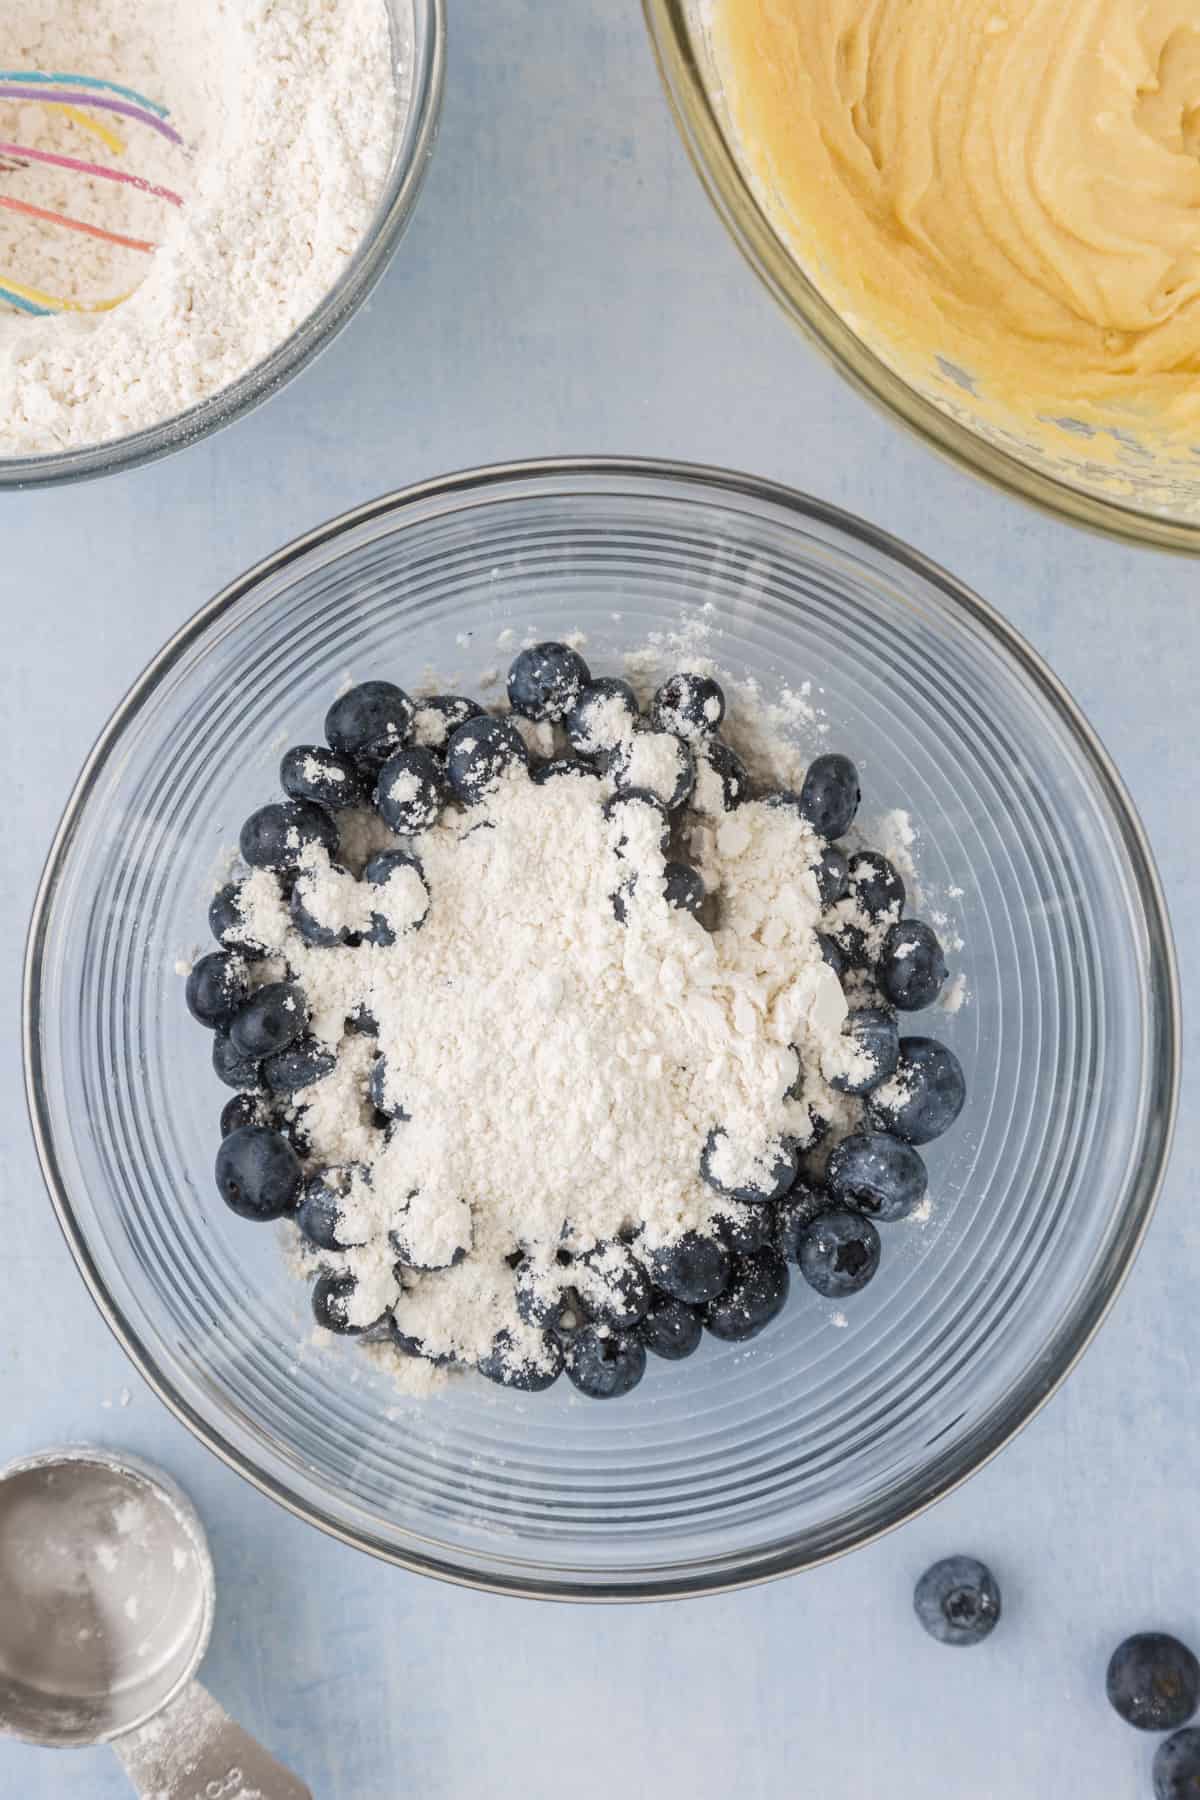 Ingredients for blueberry bread in a bowl on a table.